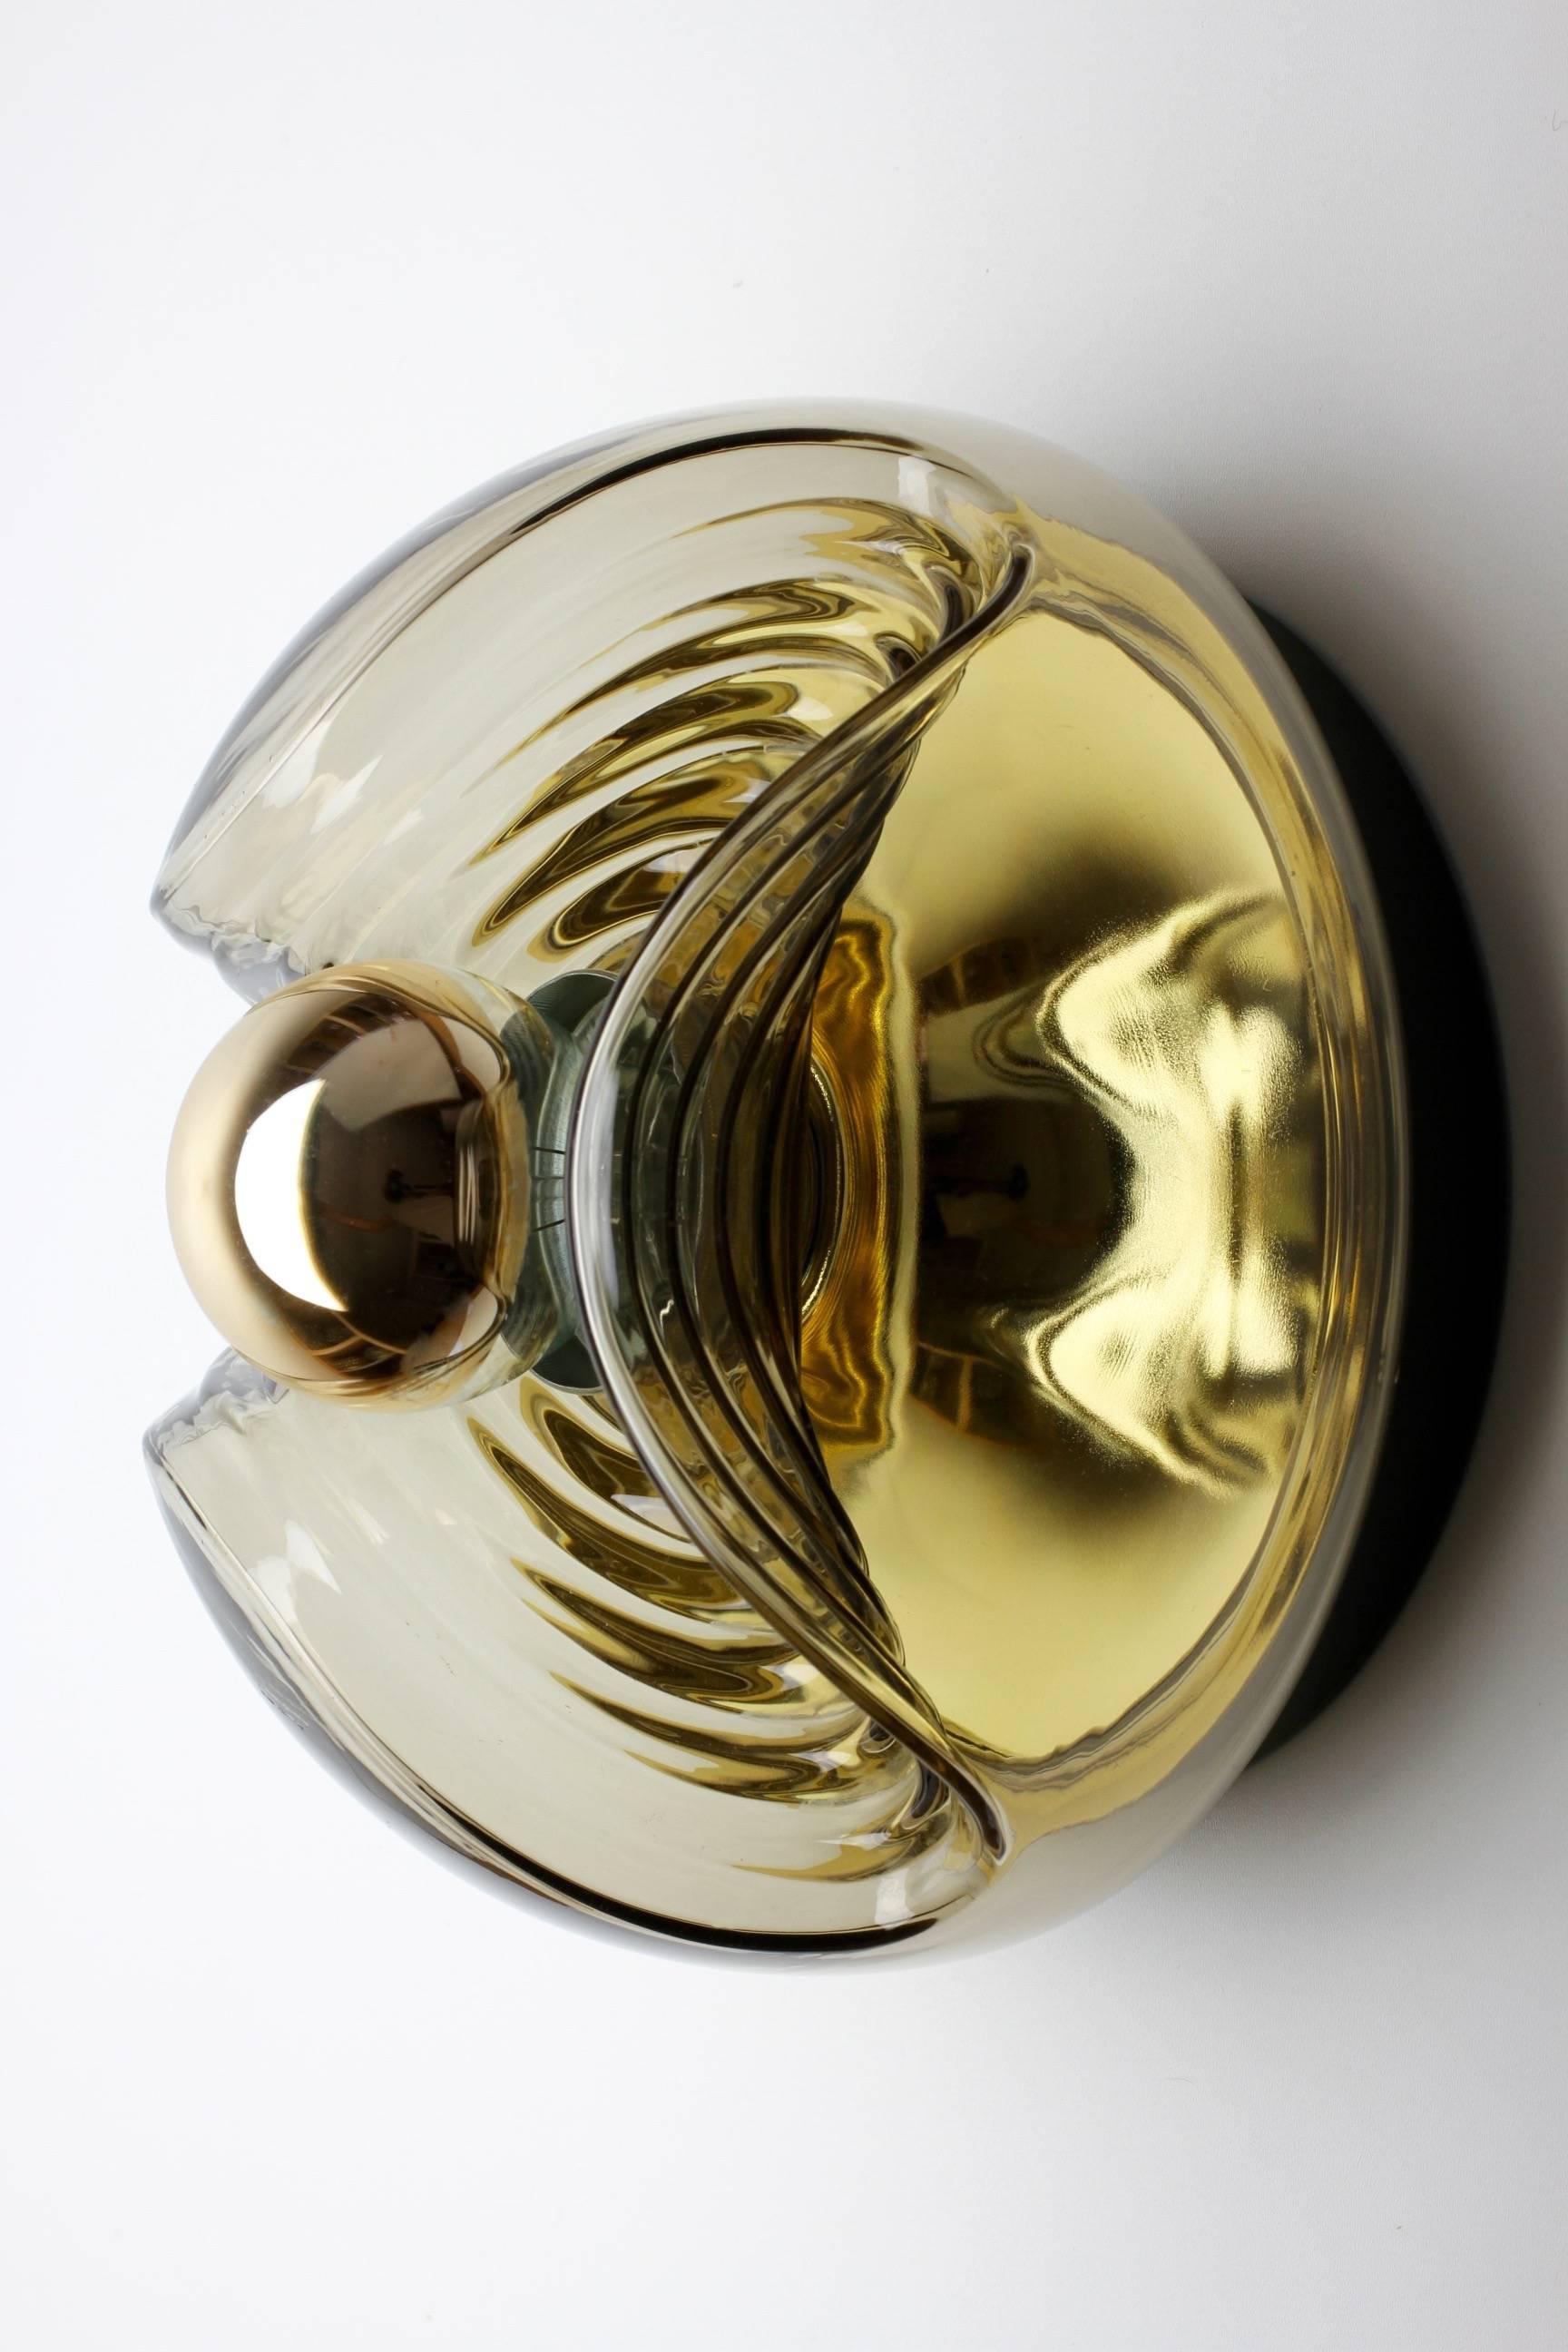 Molded Peill & Putzler 1970s Smoked Glass and Brass Biomorphic Wall Light Sconce